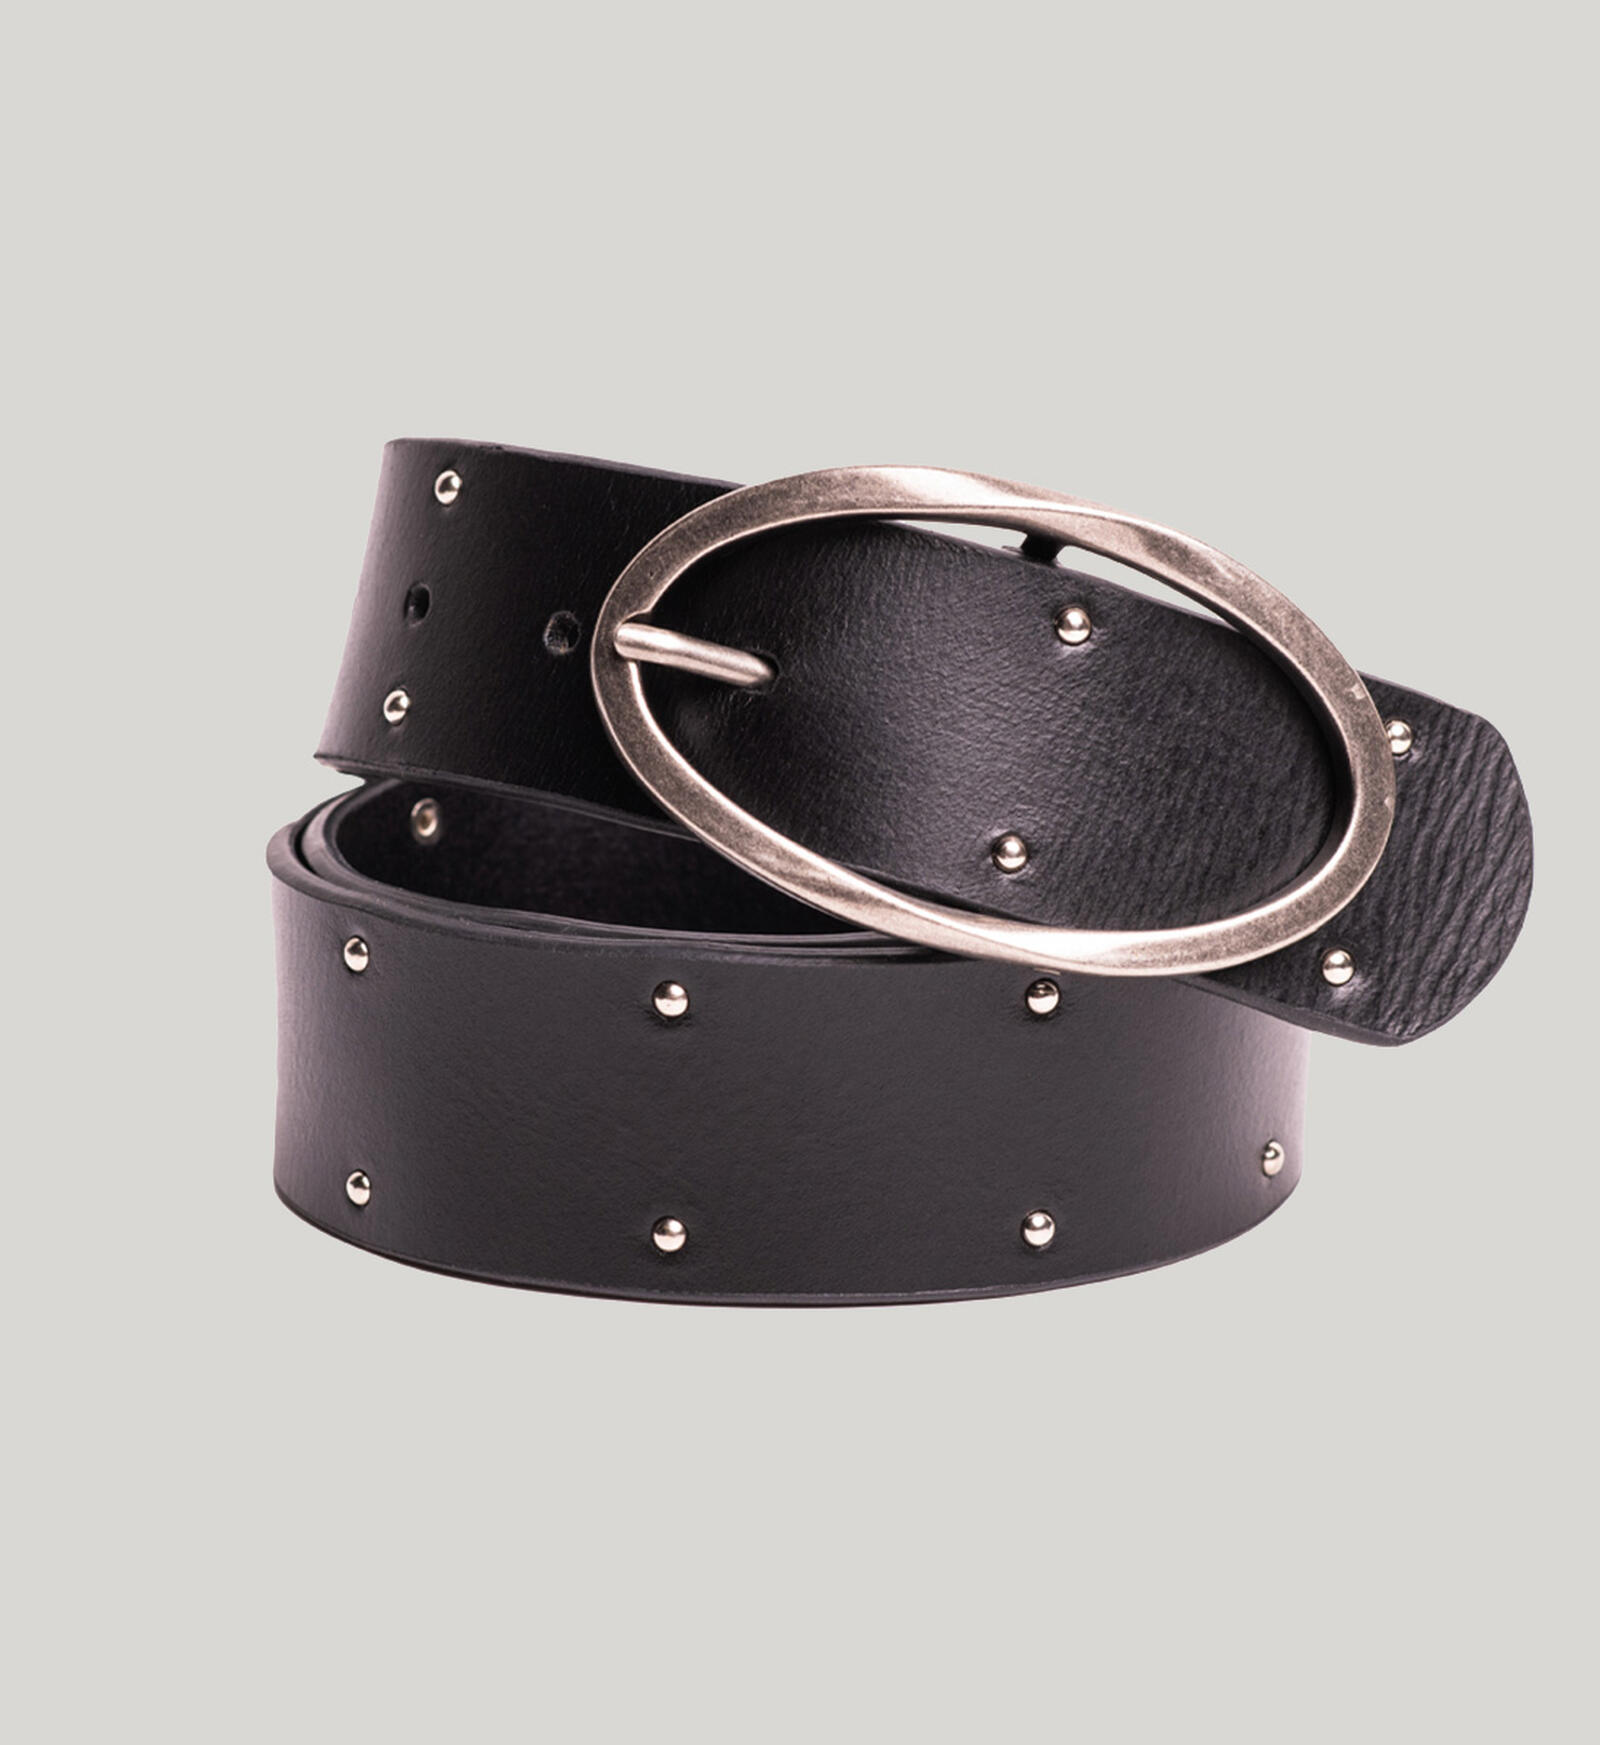 Buy Womens Genuine Leather Studded Belt for CAD 50.00